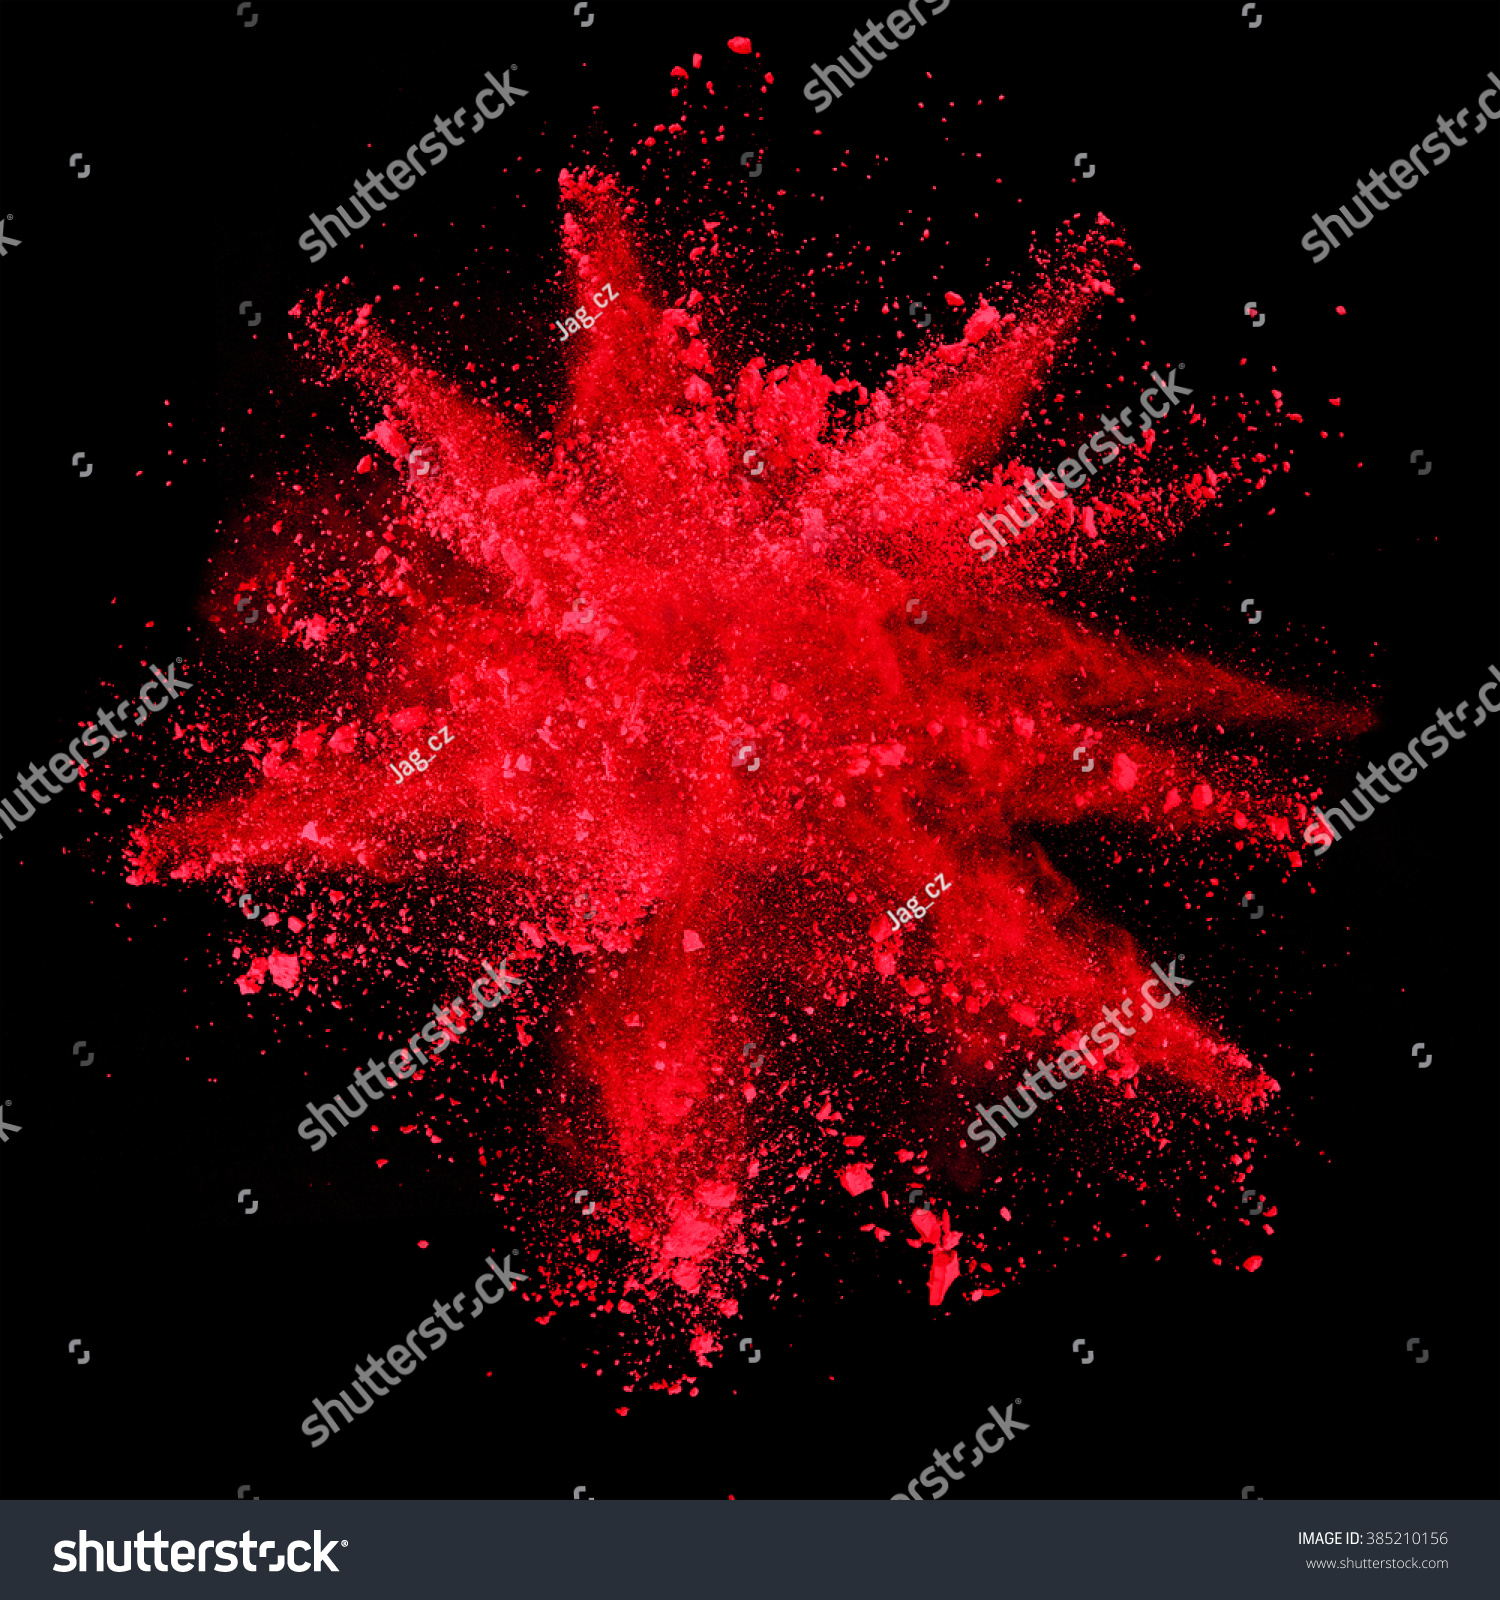 Explosion of red powder on black background #385210156